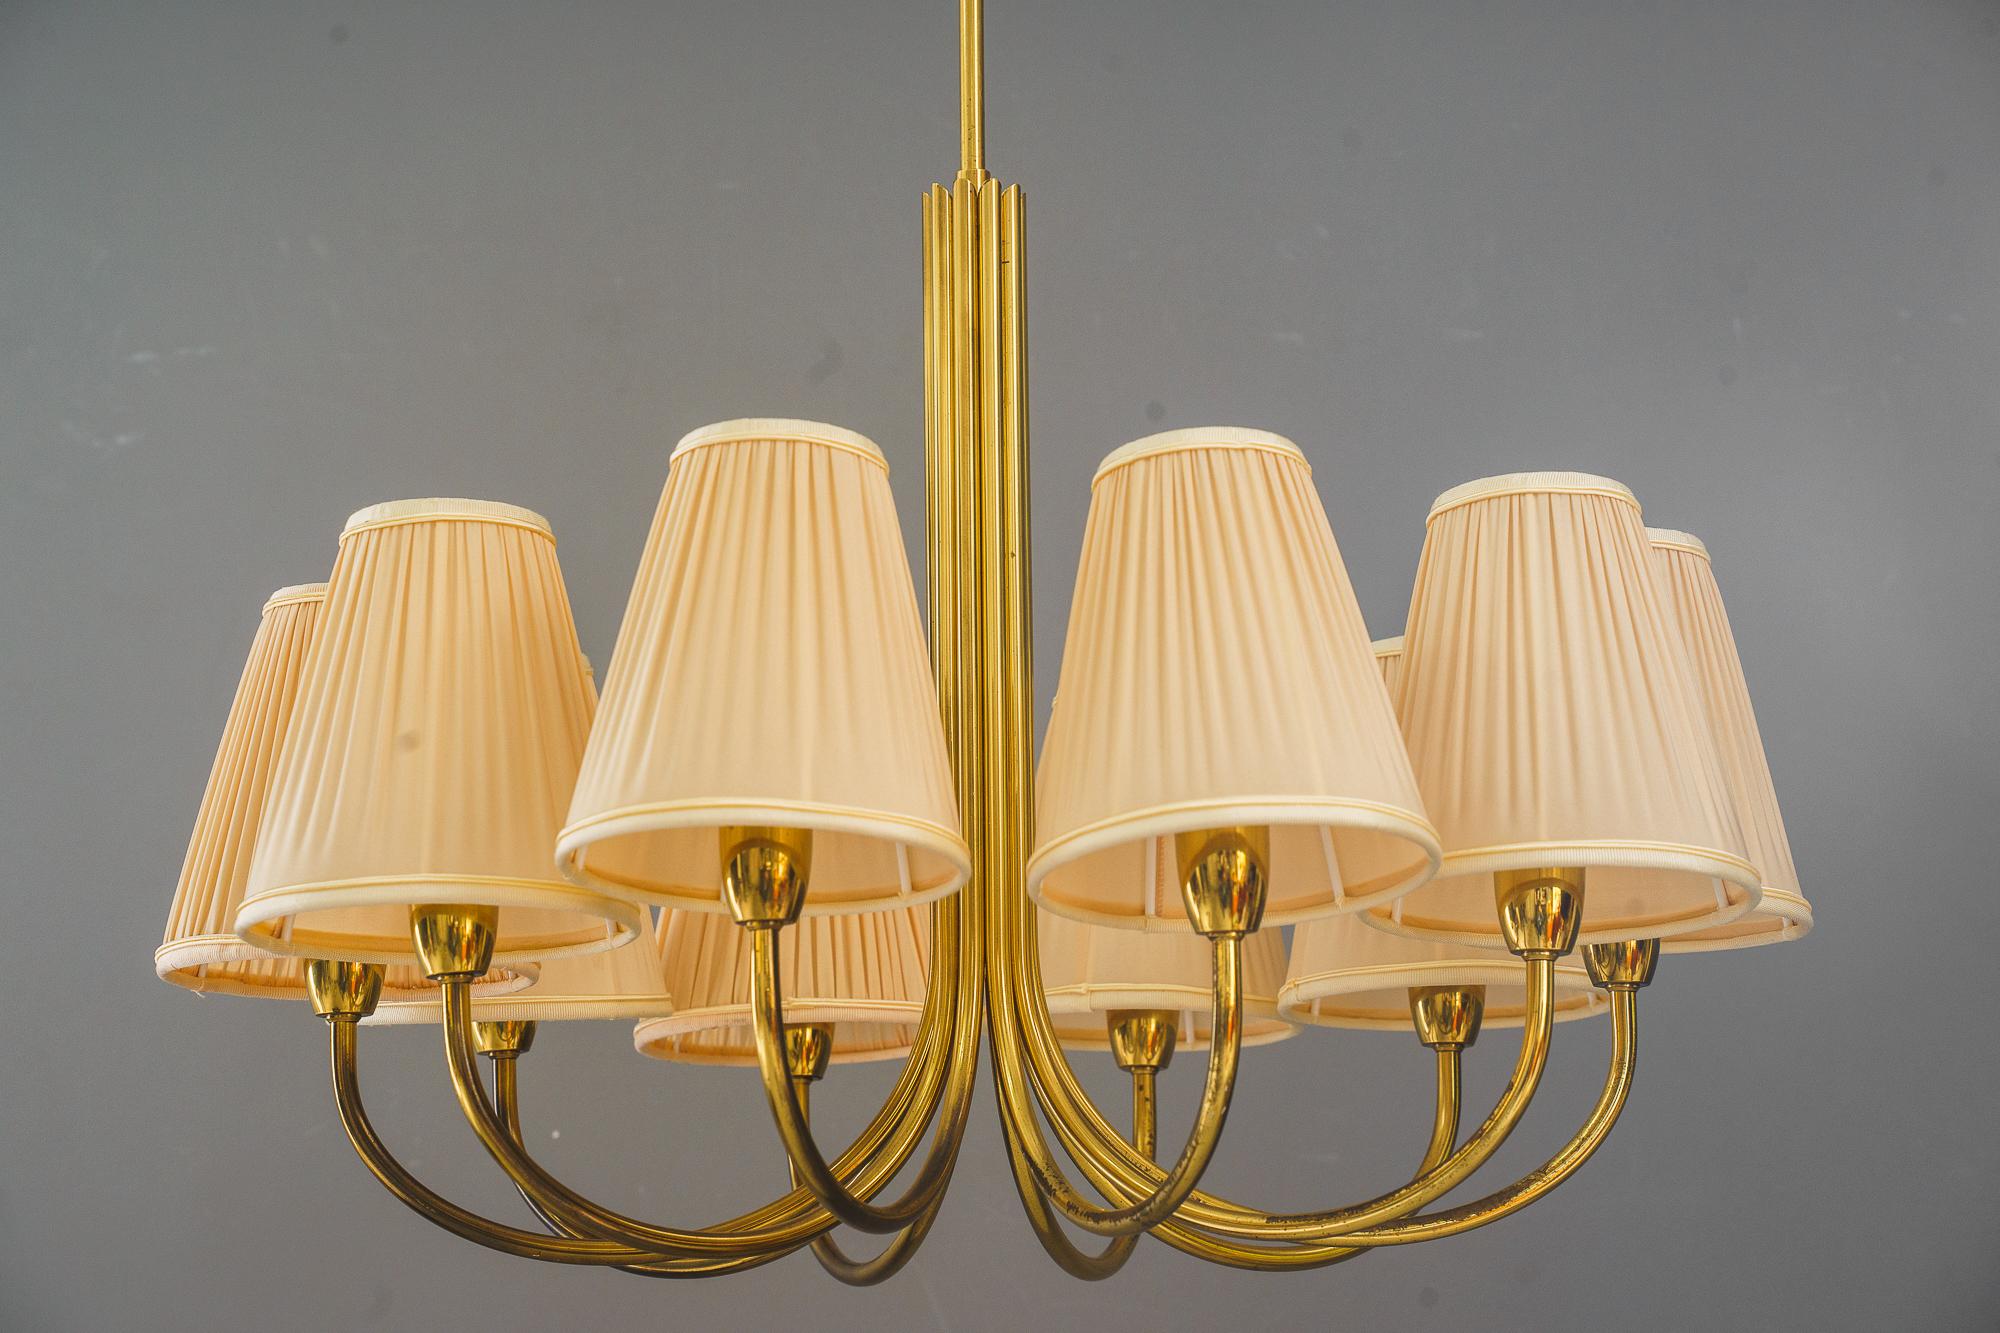 Rupert nikoll chandelier with new fabric shades vienna around 1960s
the shades are replaced ( new )
Original condition